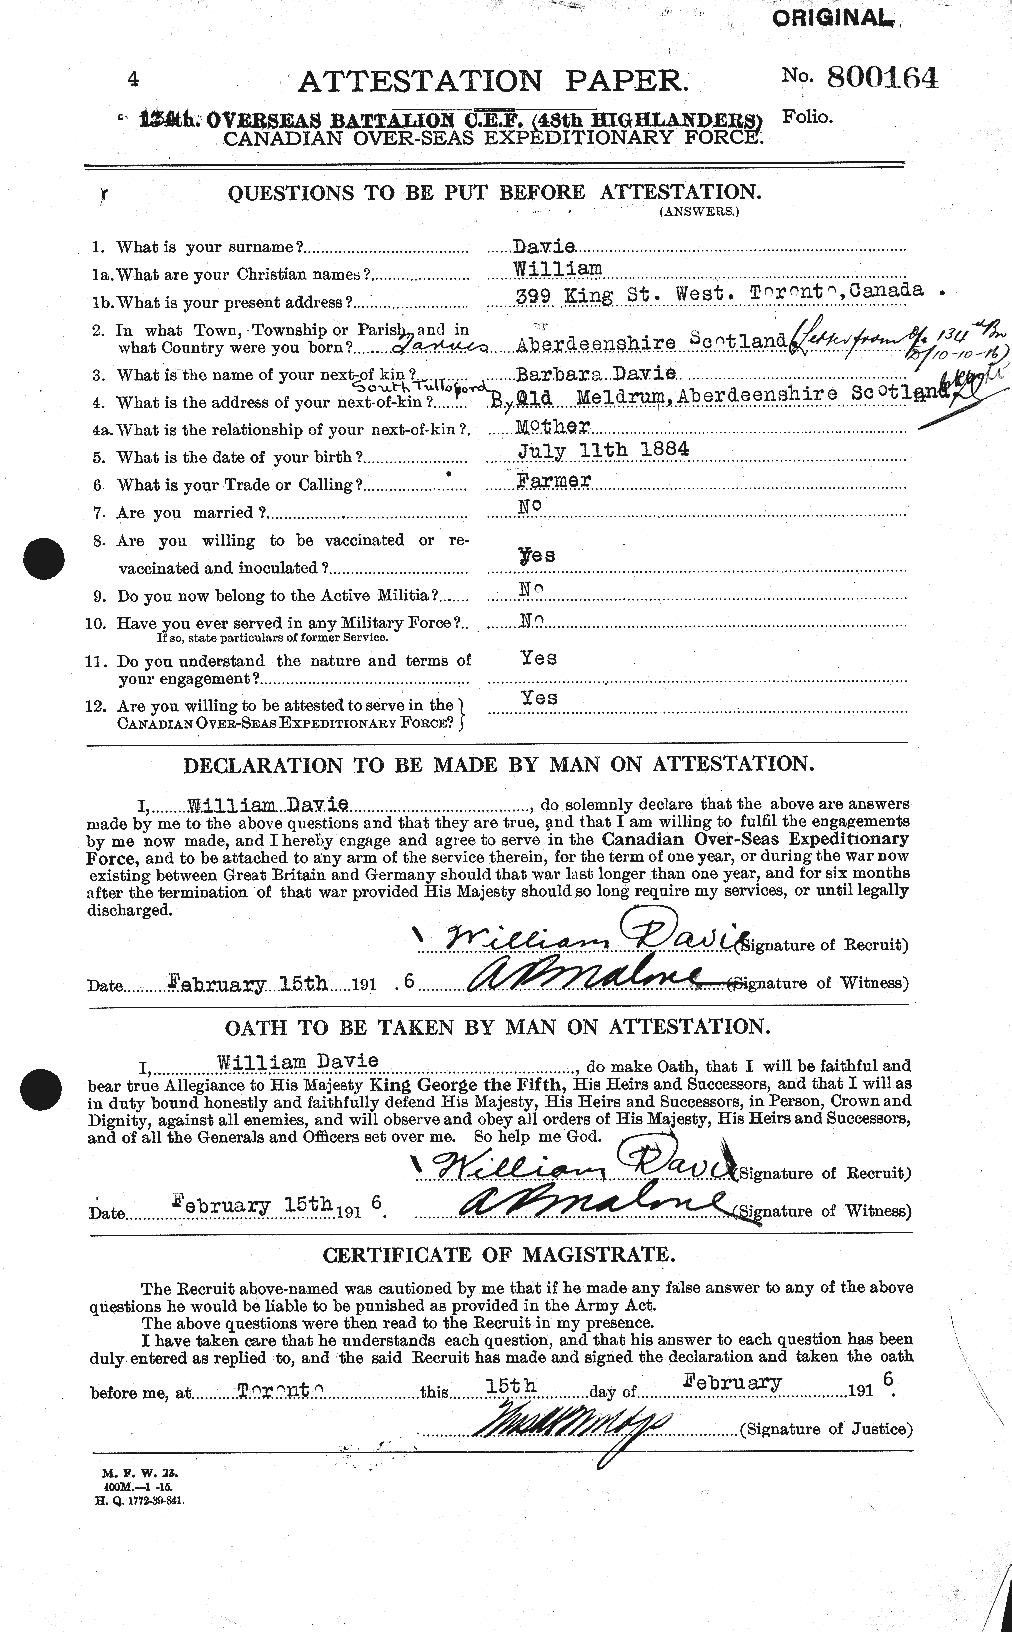 Personnel Records of the First World War - CEF 278849a